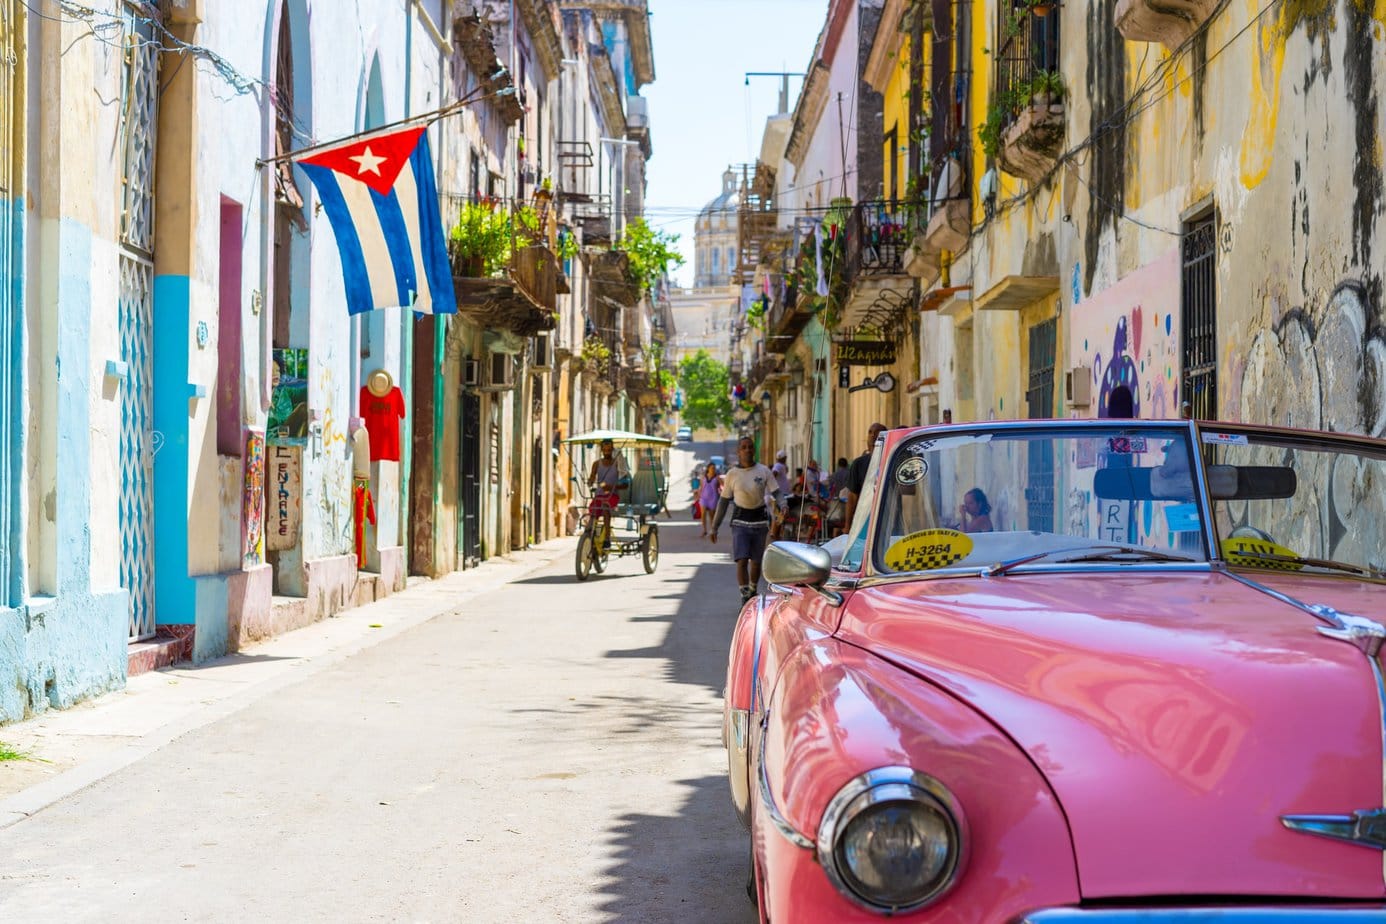 Heading to Cuba? Here’s a list of places you must visit